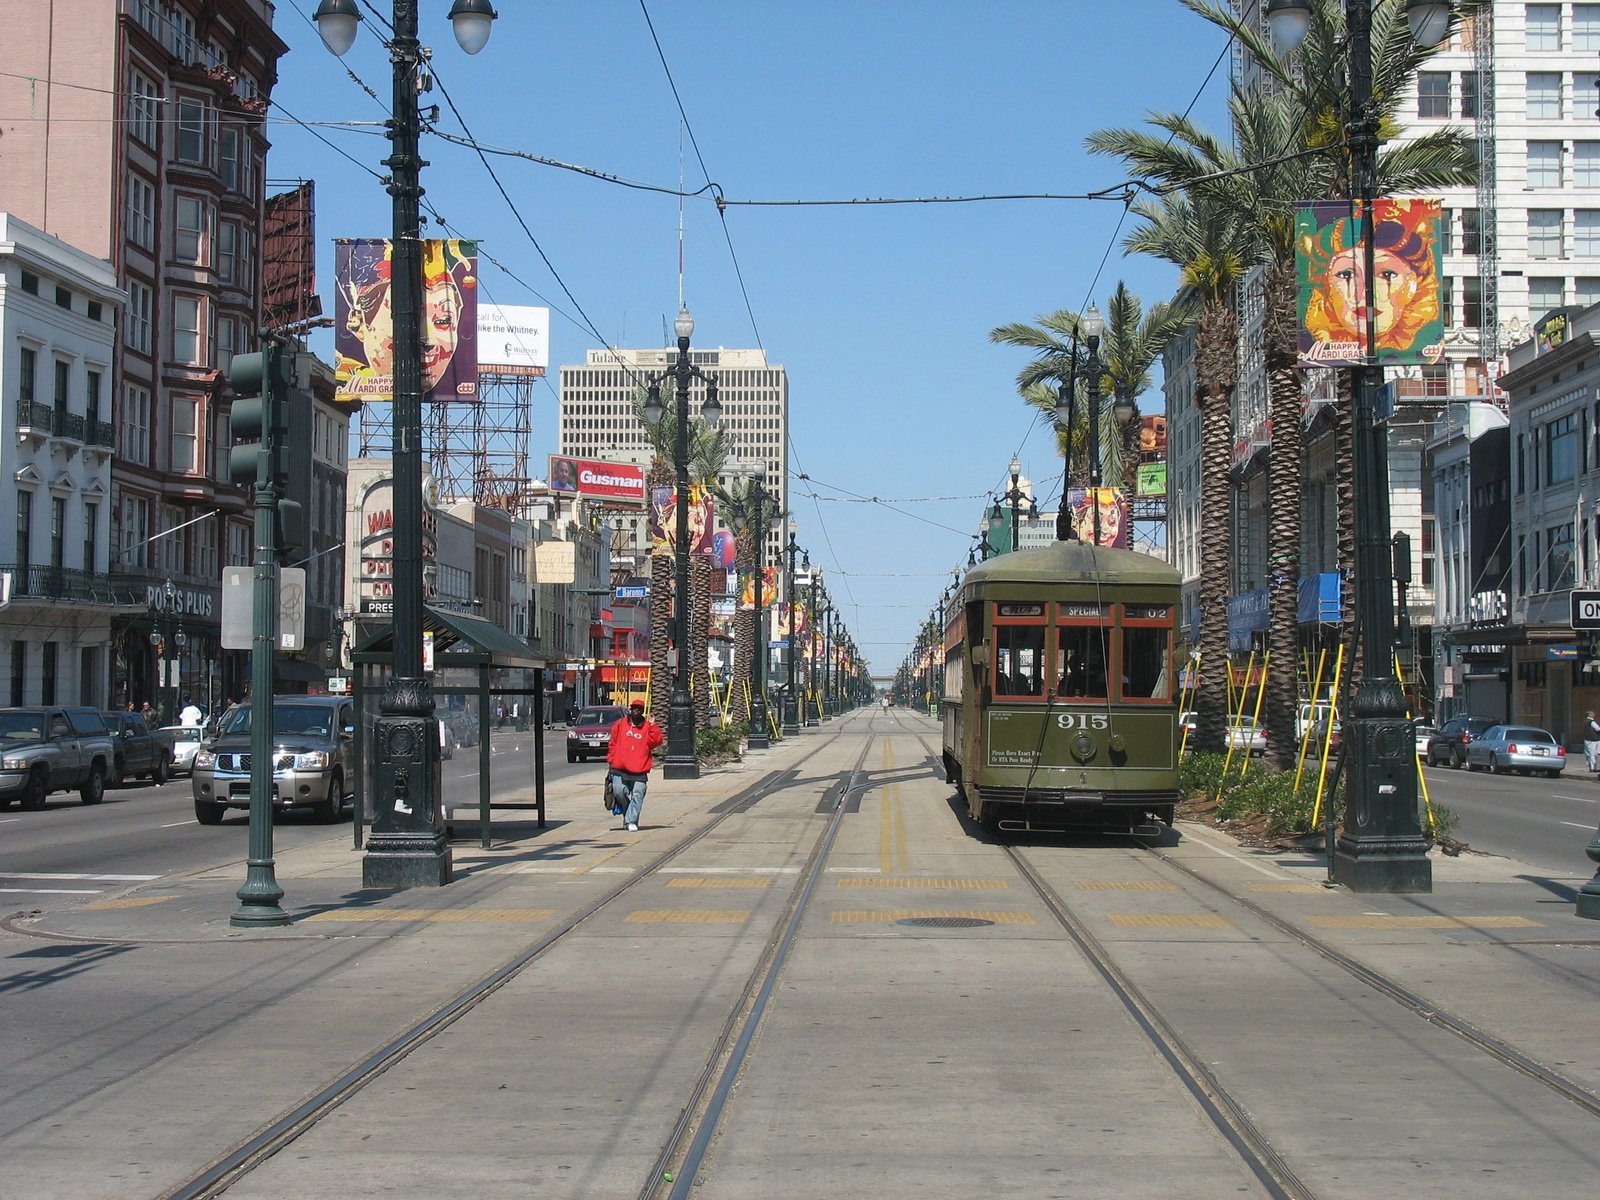 a trolley driving down a street with tall buildings in the background